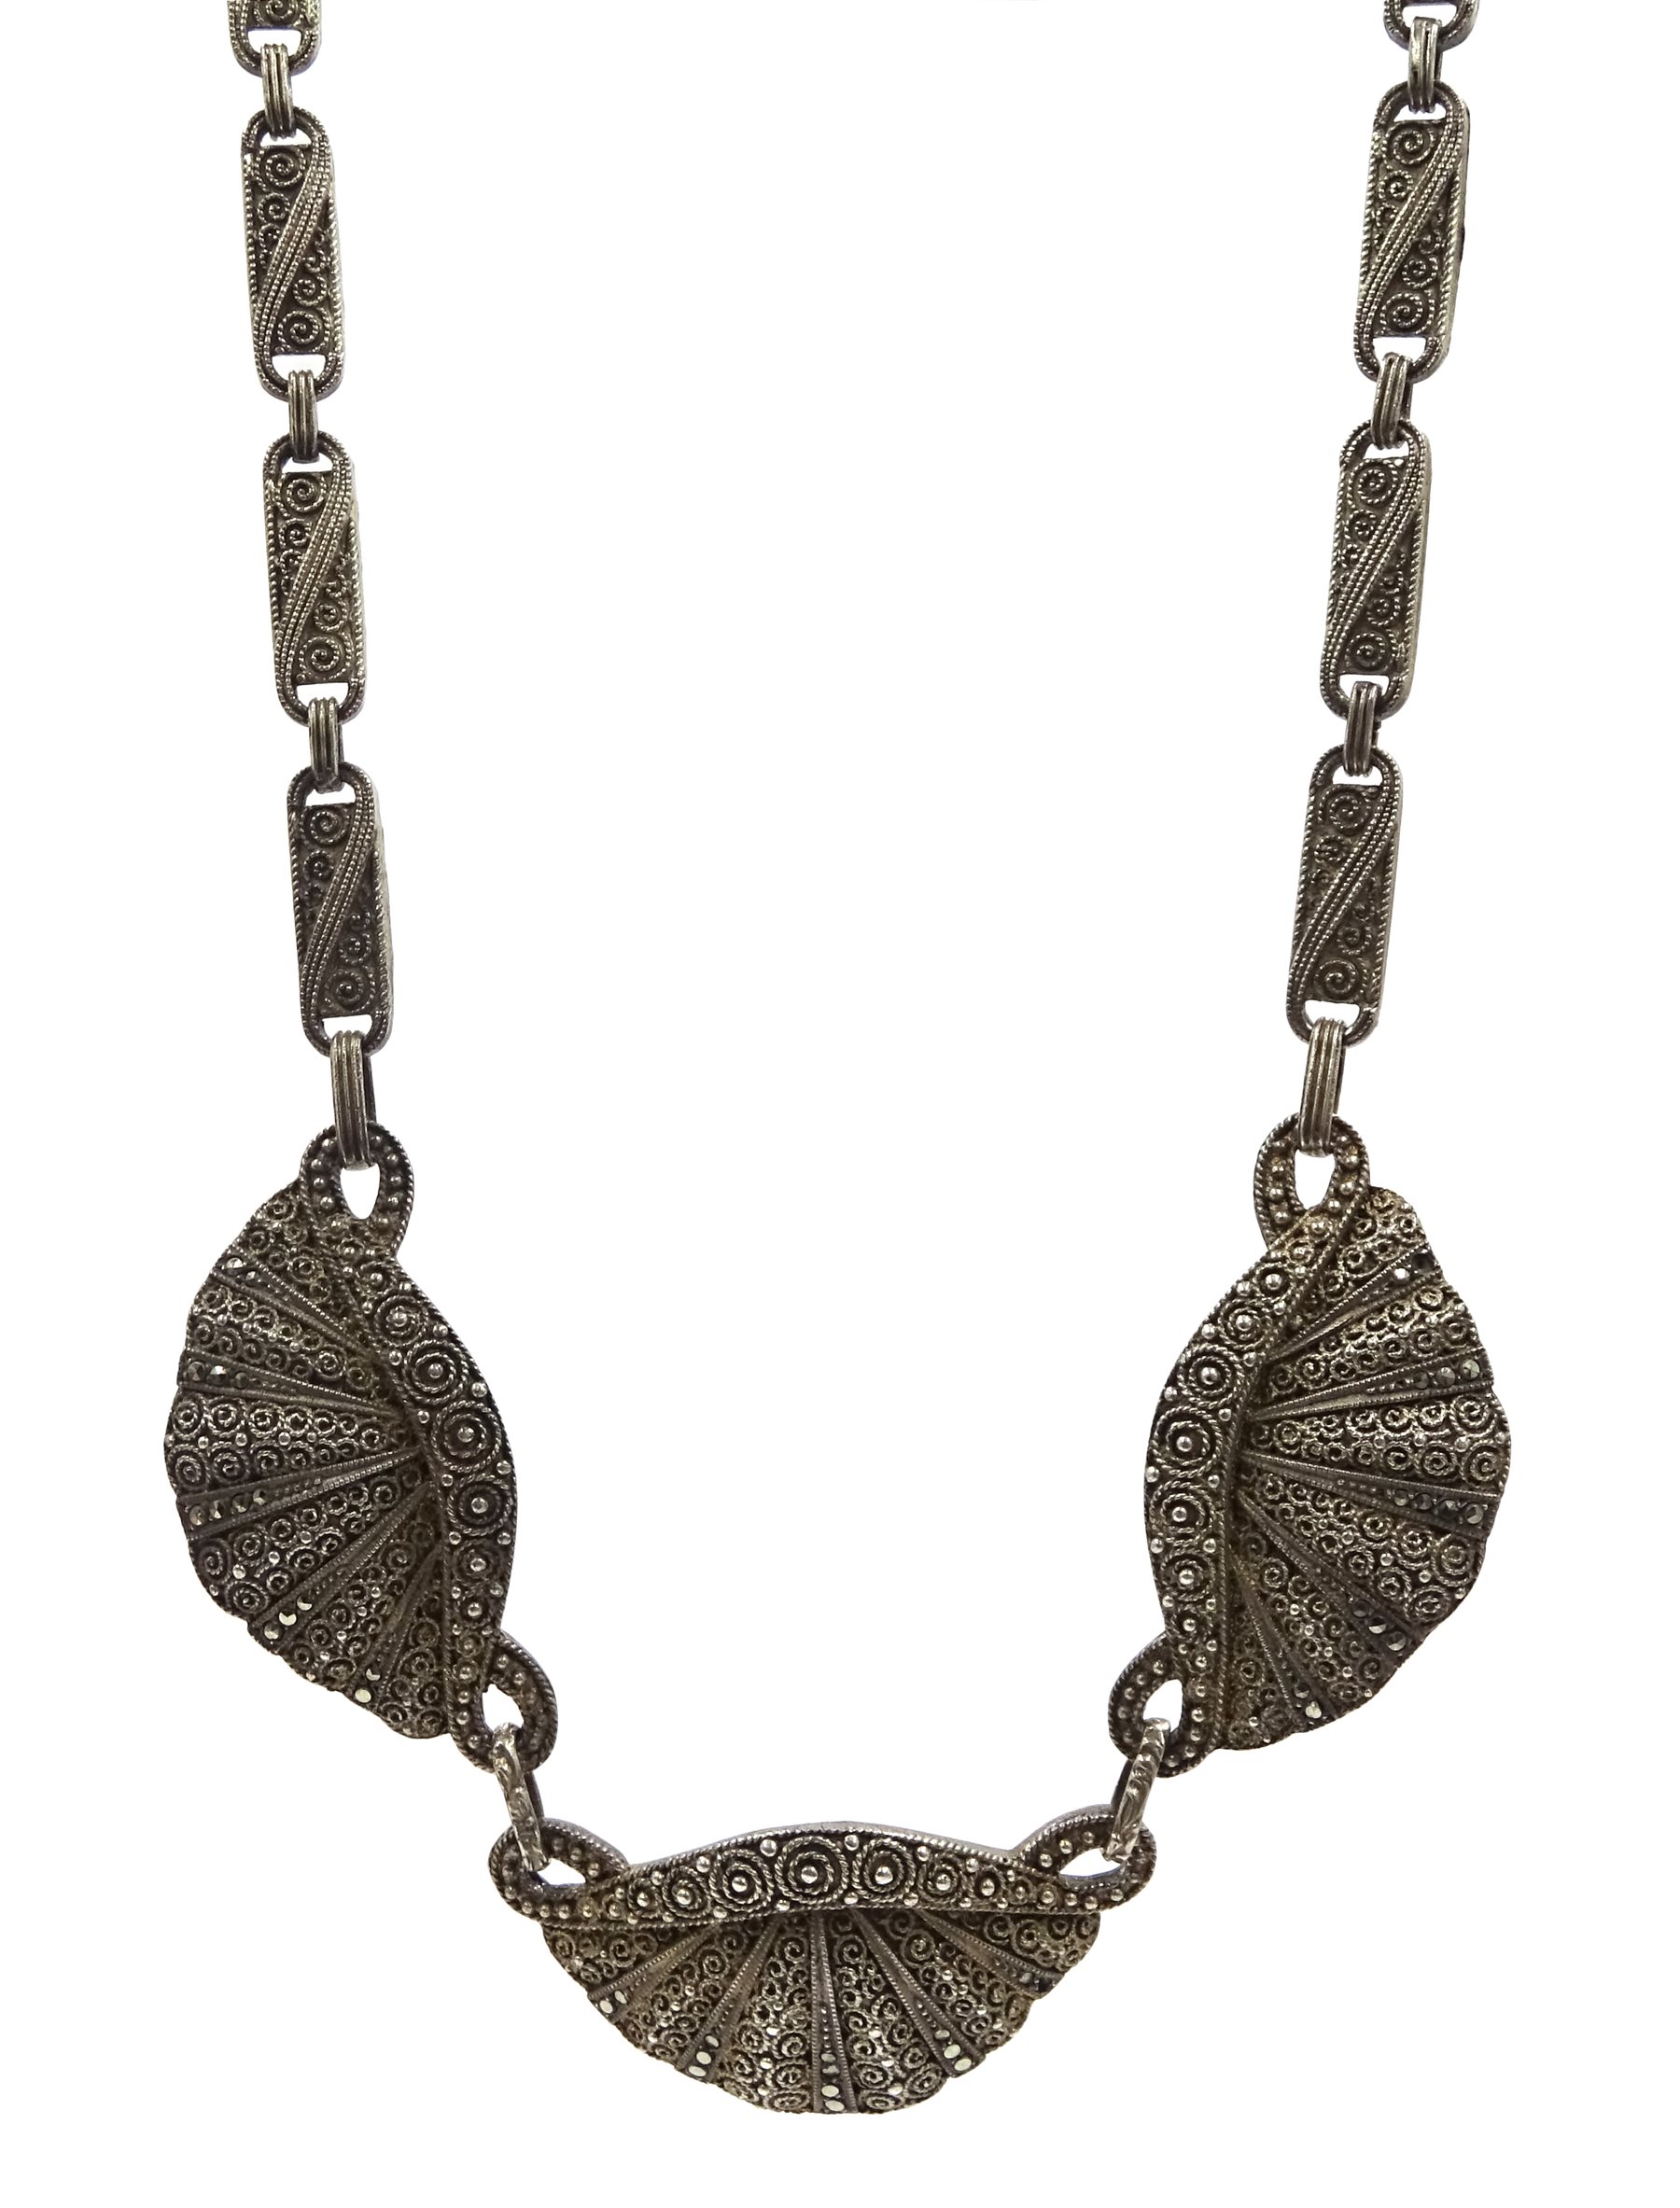 Thedore Fahrner Art Deco silver and marcasite scalloped design necklace, stamped TF 925